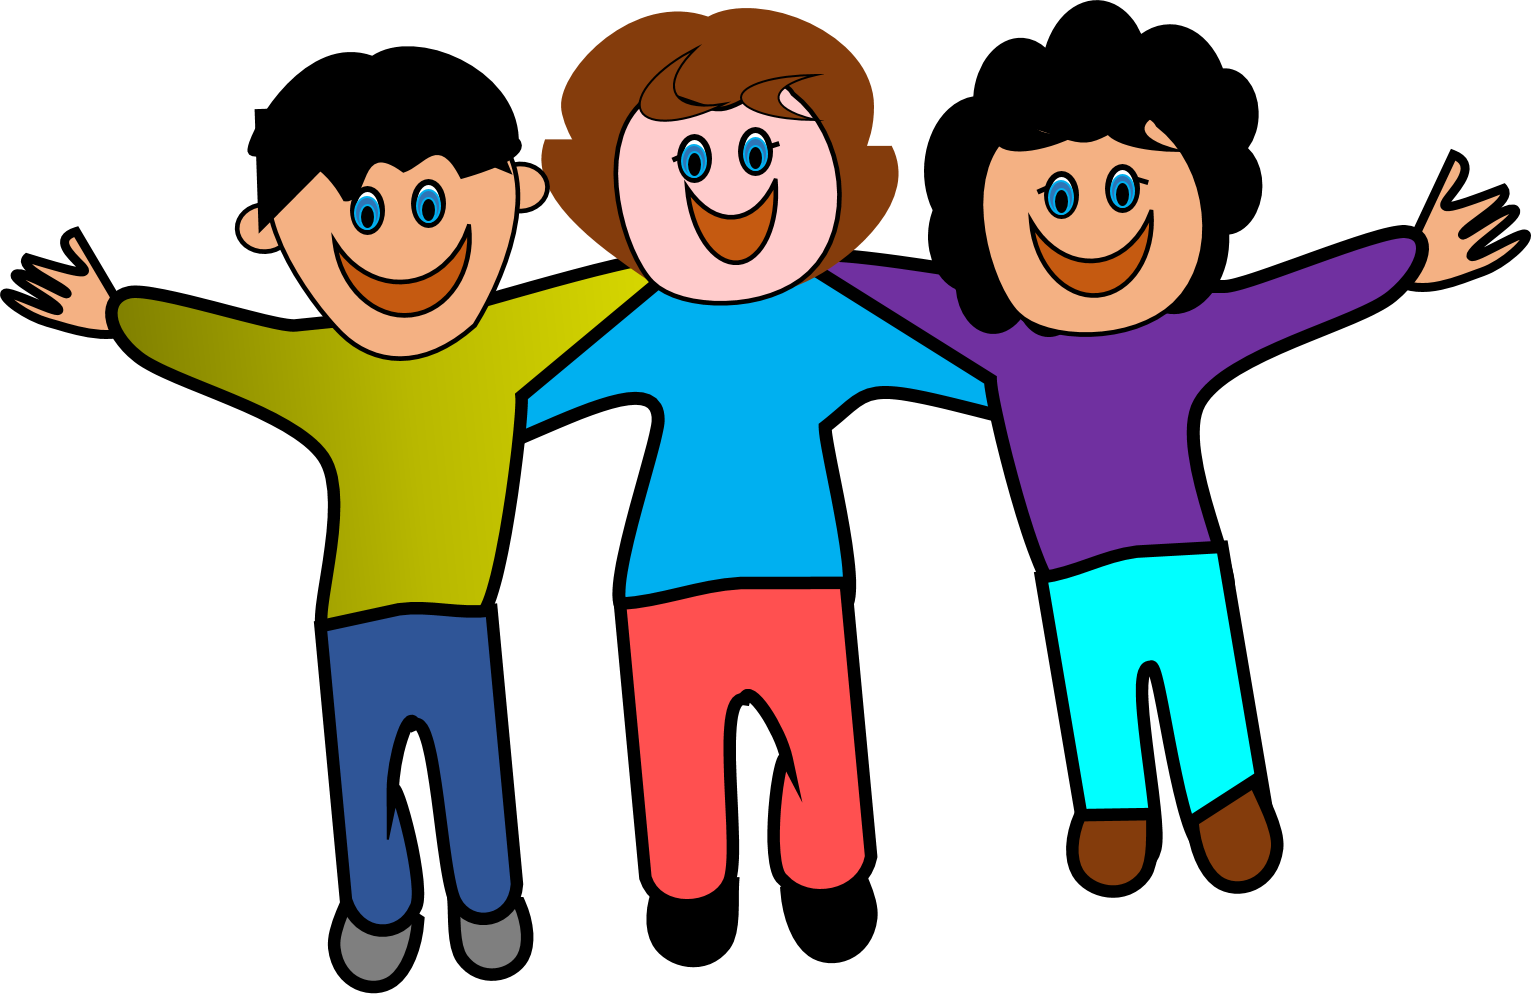 Free content Download Clip art - Friends Together Cliparts png download ...